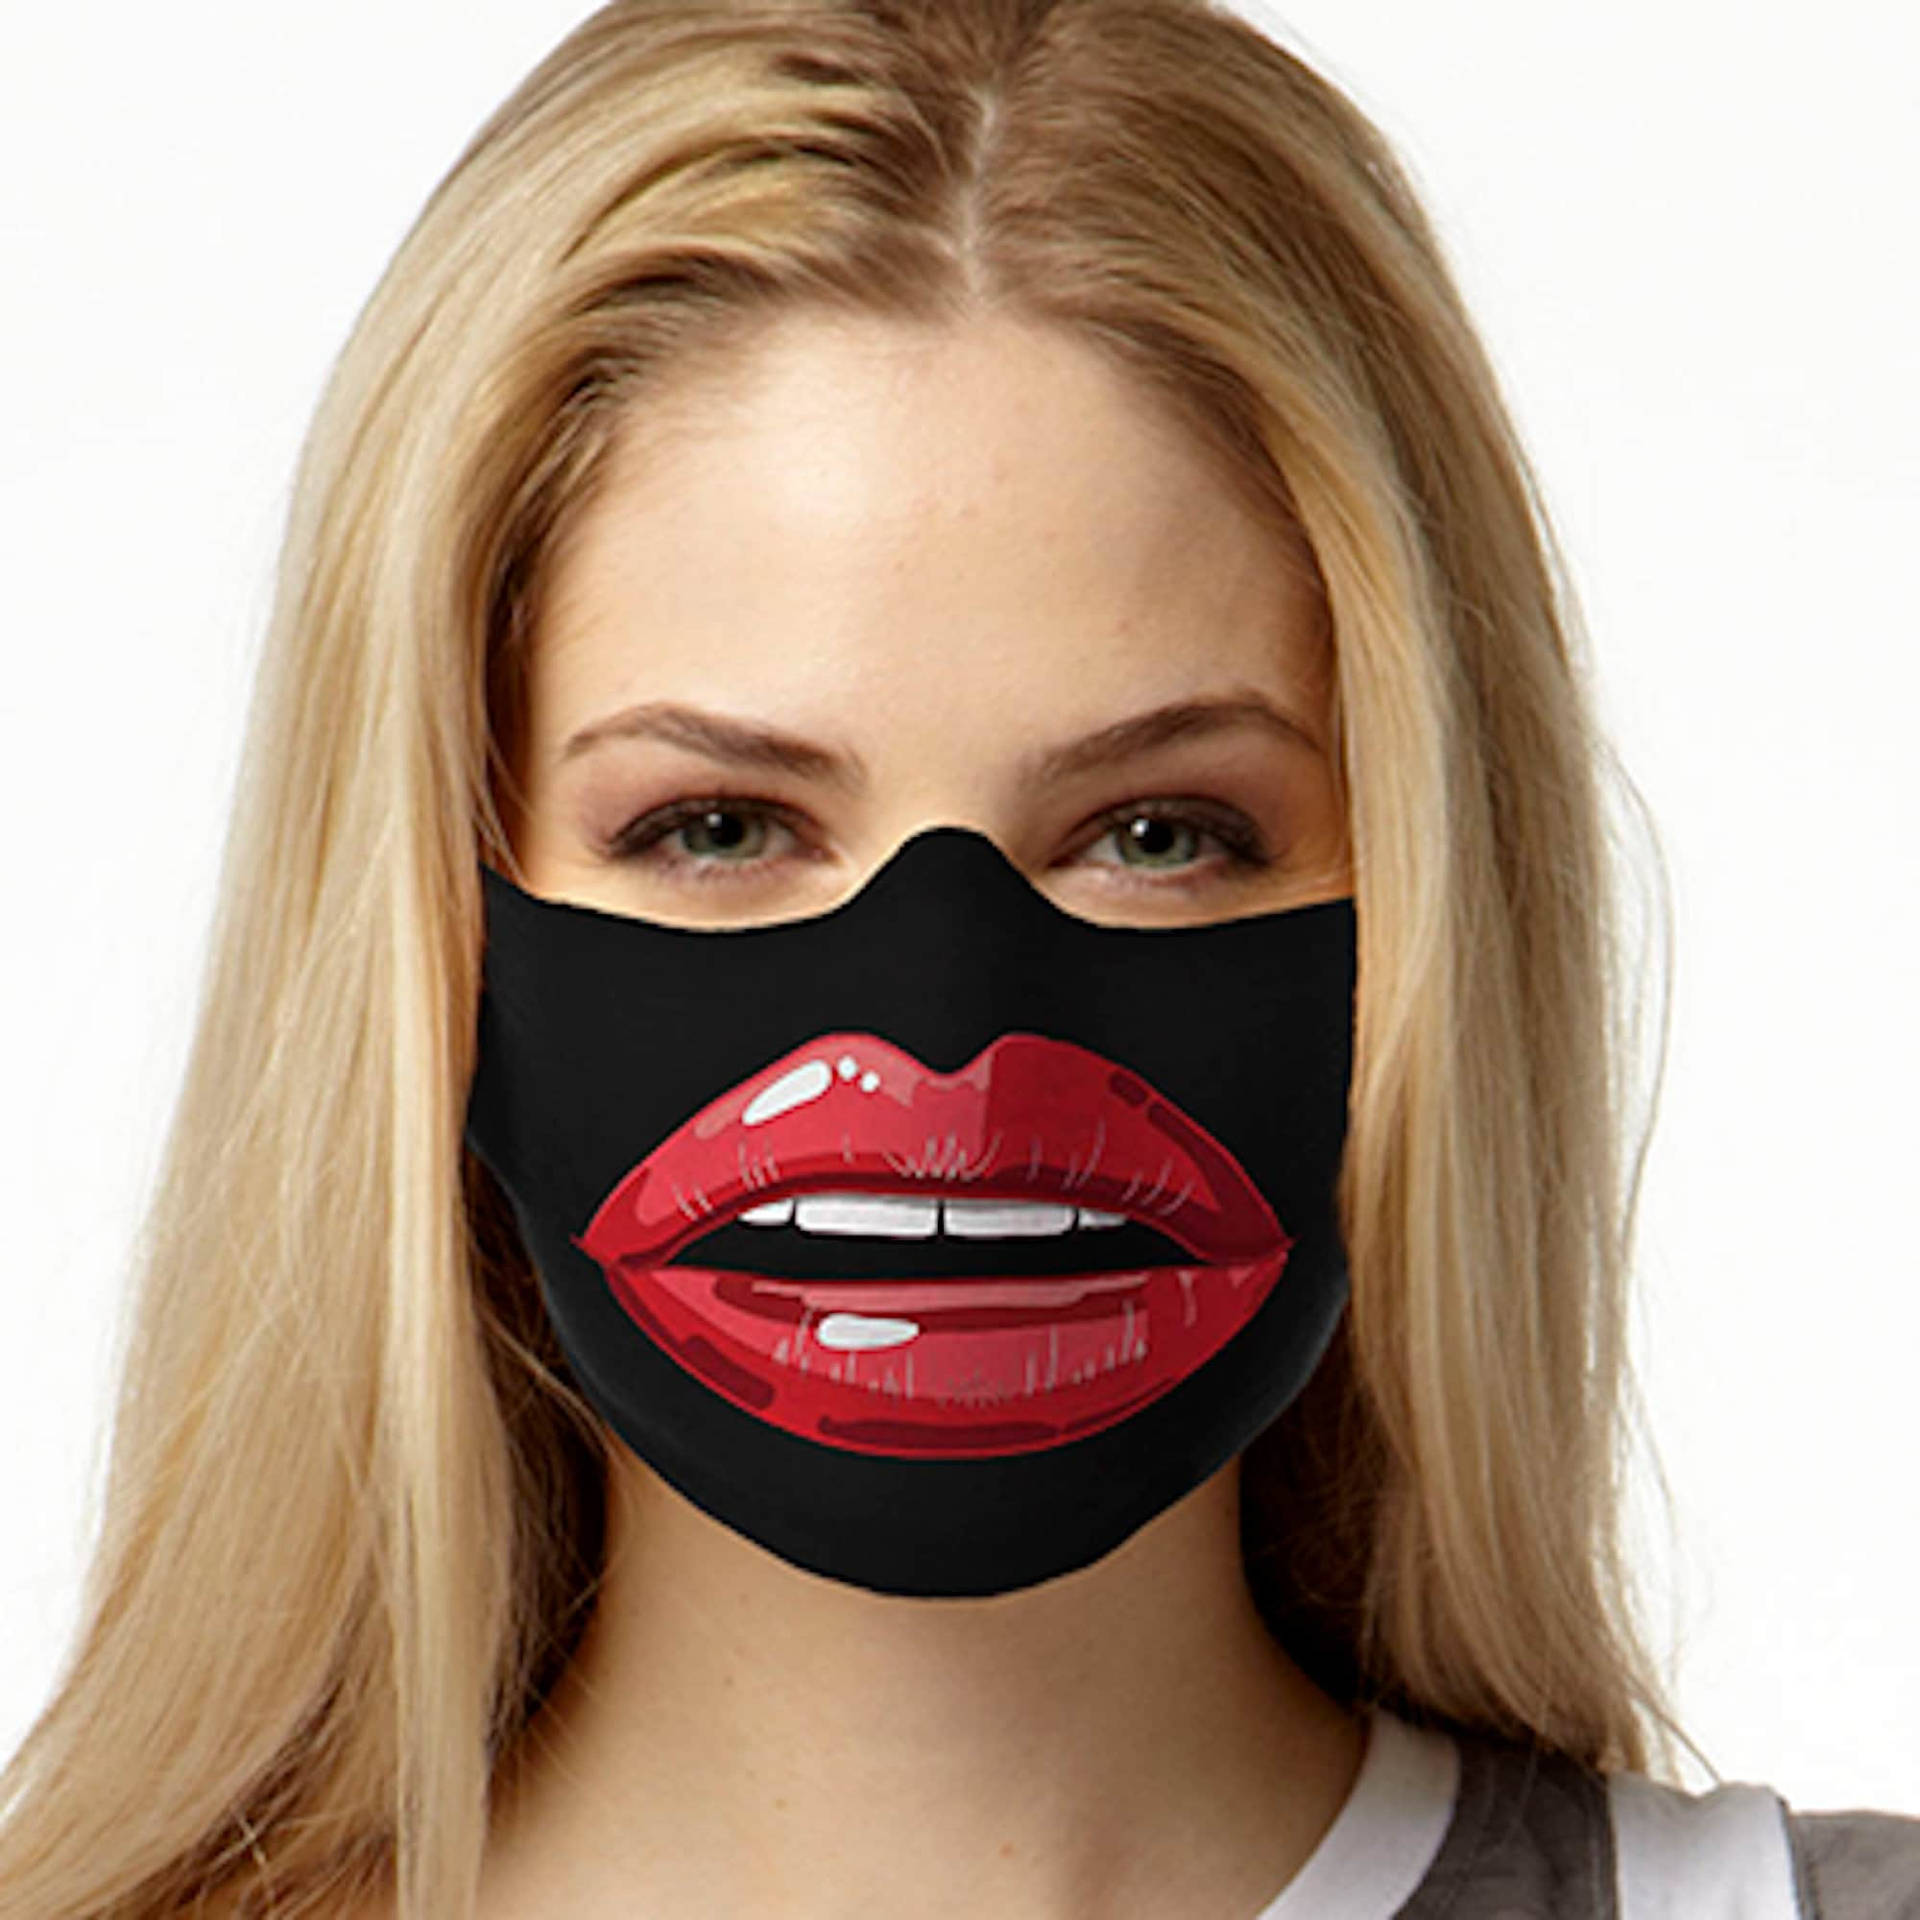 Funny Face Big Mouth Mask Wallpaper